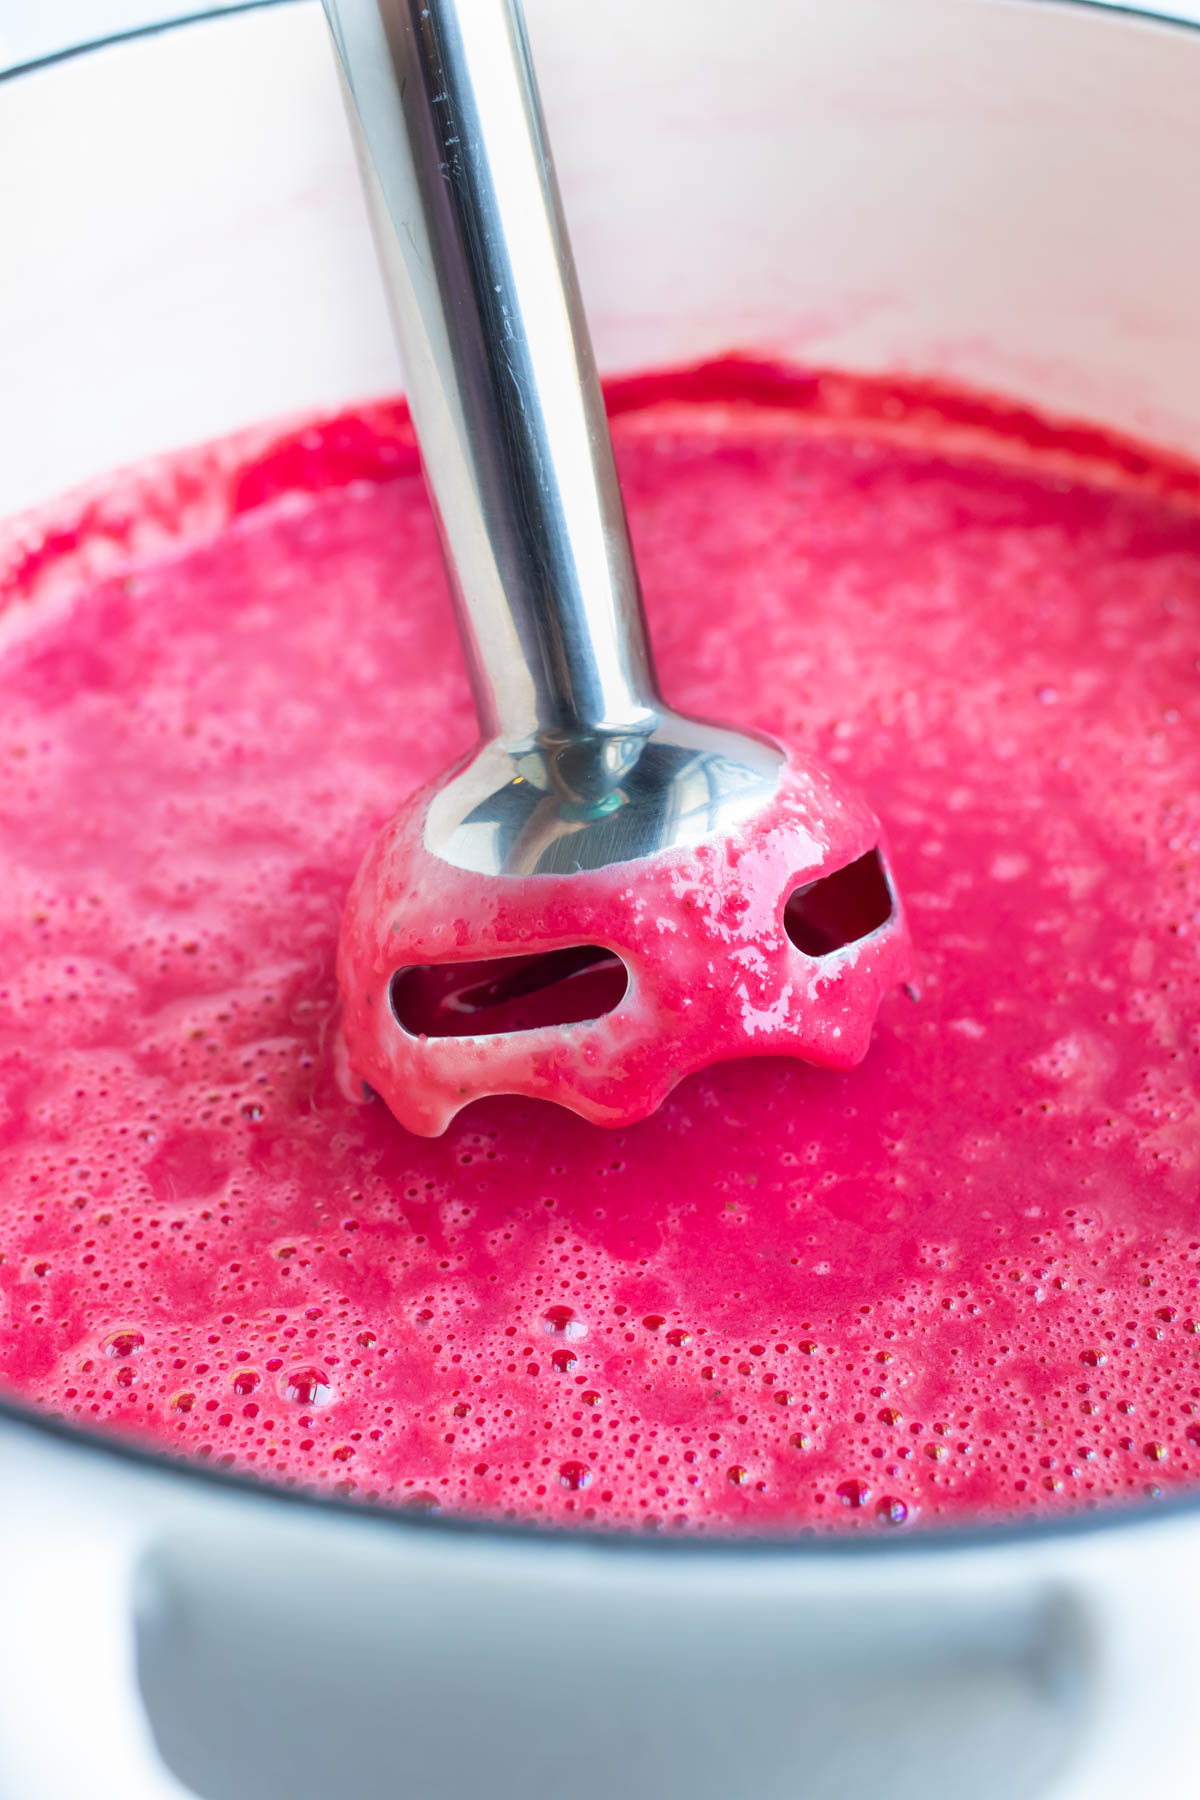 Beet soup is puréed for a creamy, smooth texture.